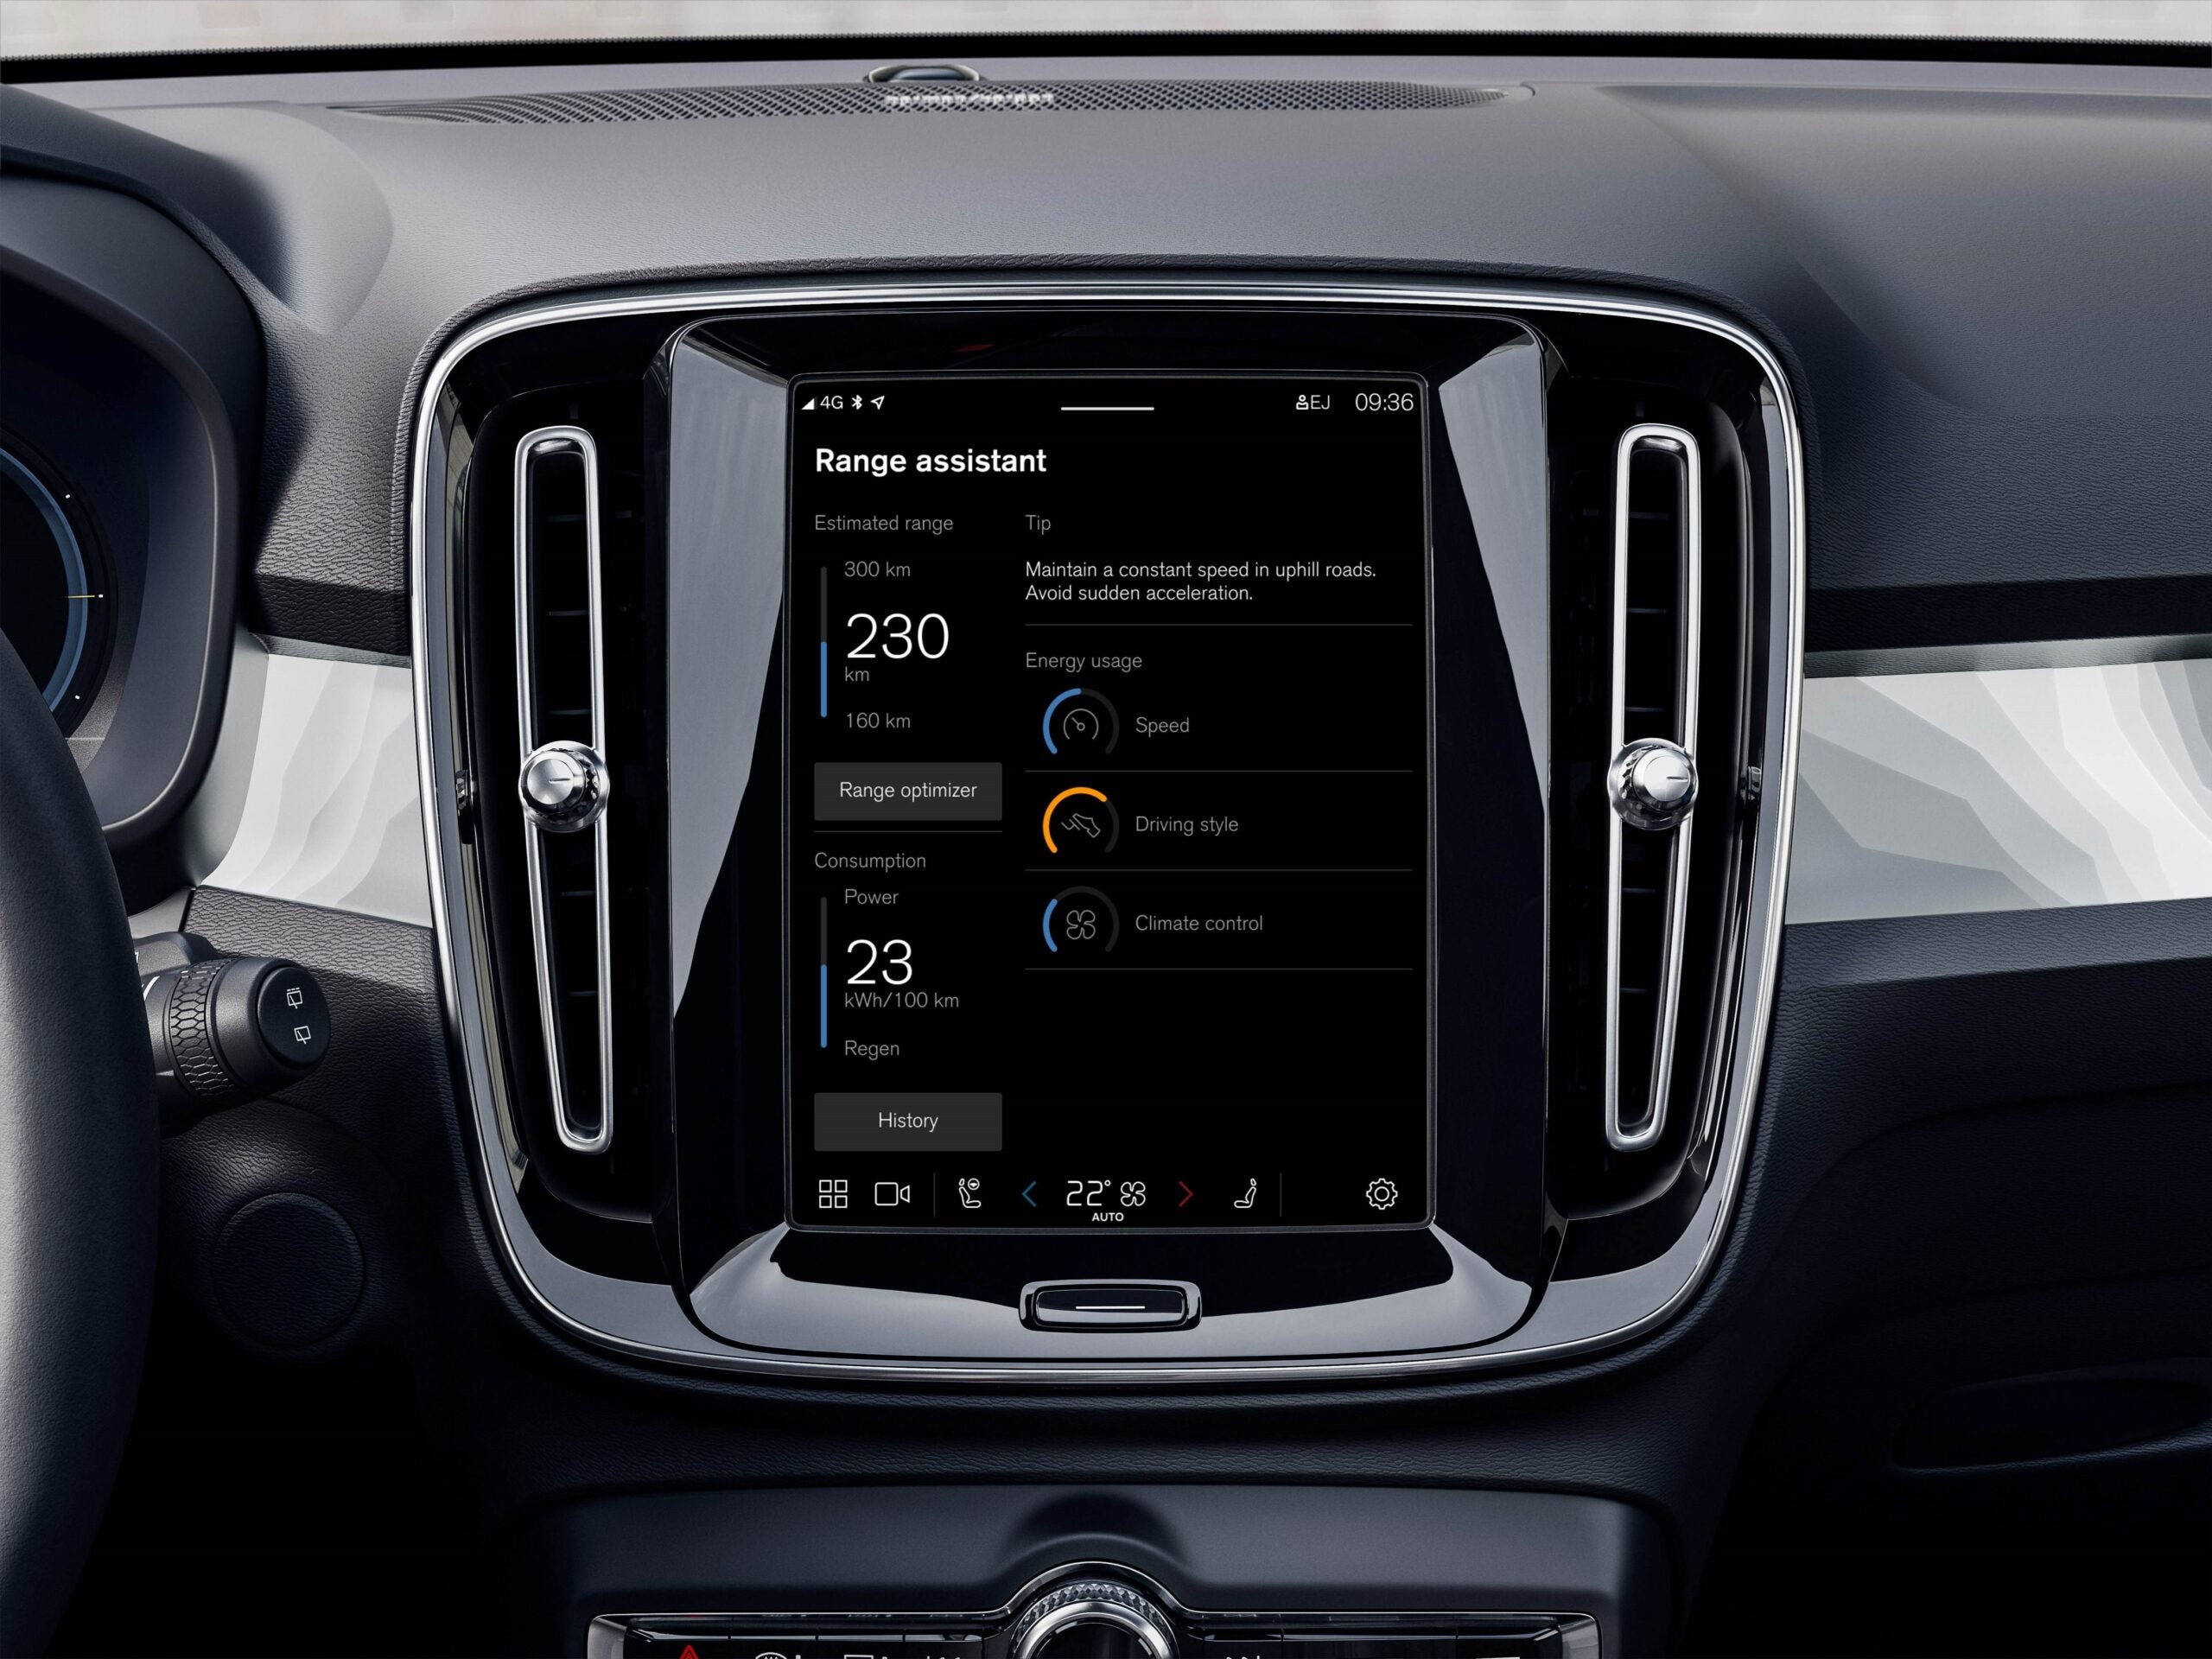 Stay Connected and Up-To-Date with Latest Features on Volvo Cars' OTA Update Capability